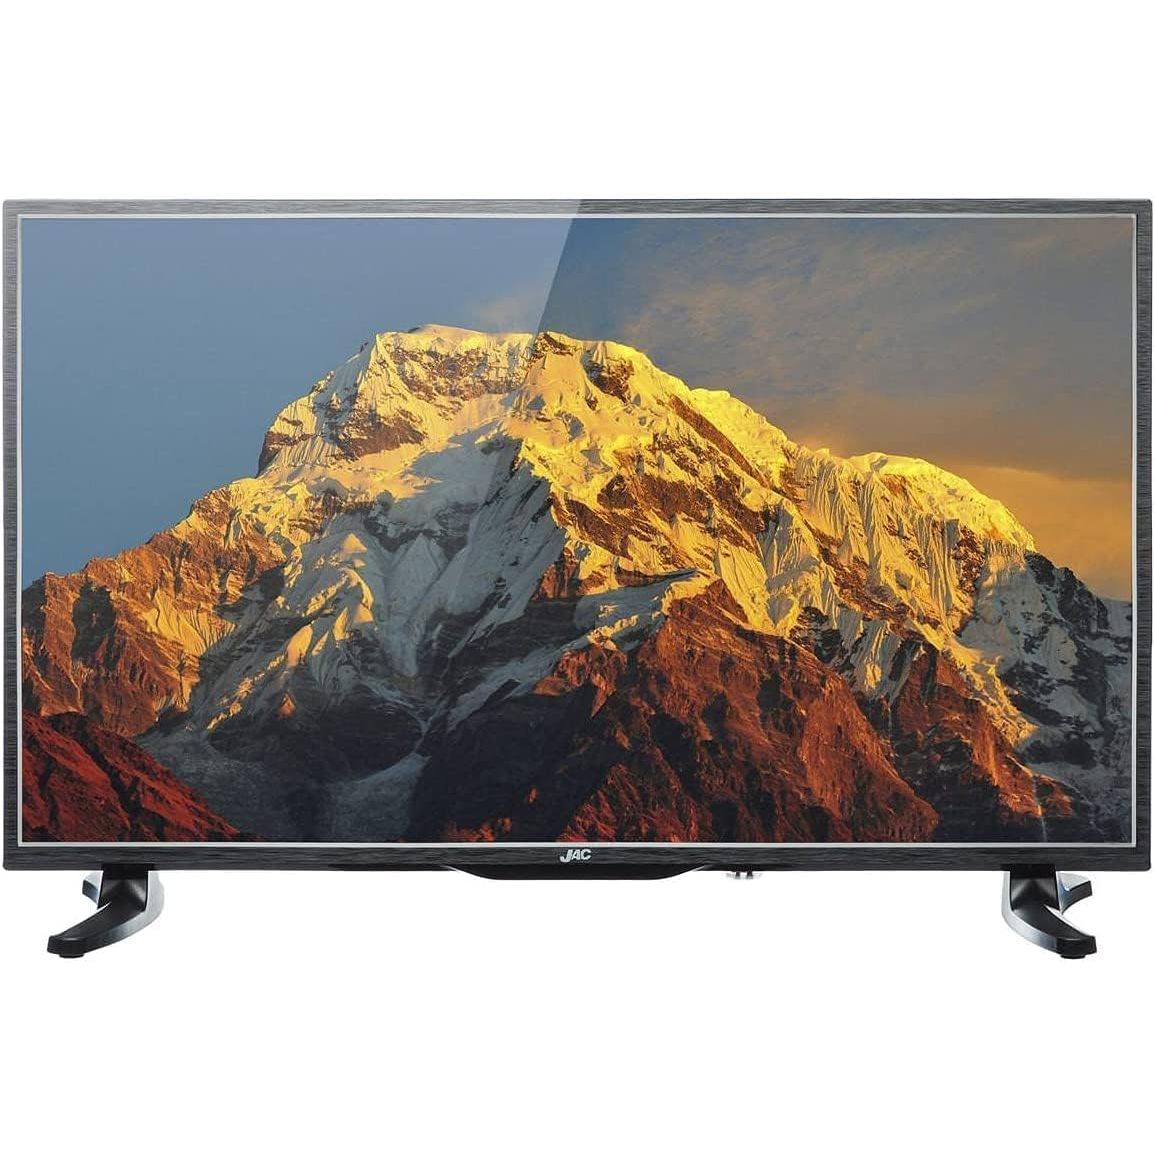 Haier 50 Inch 4K UHD Smart LED TV with Built in Receiver - H50K62UG, Best  price in Egypt